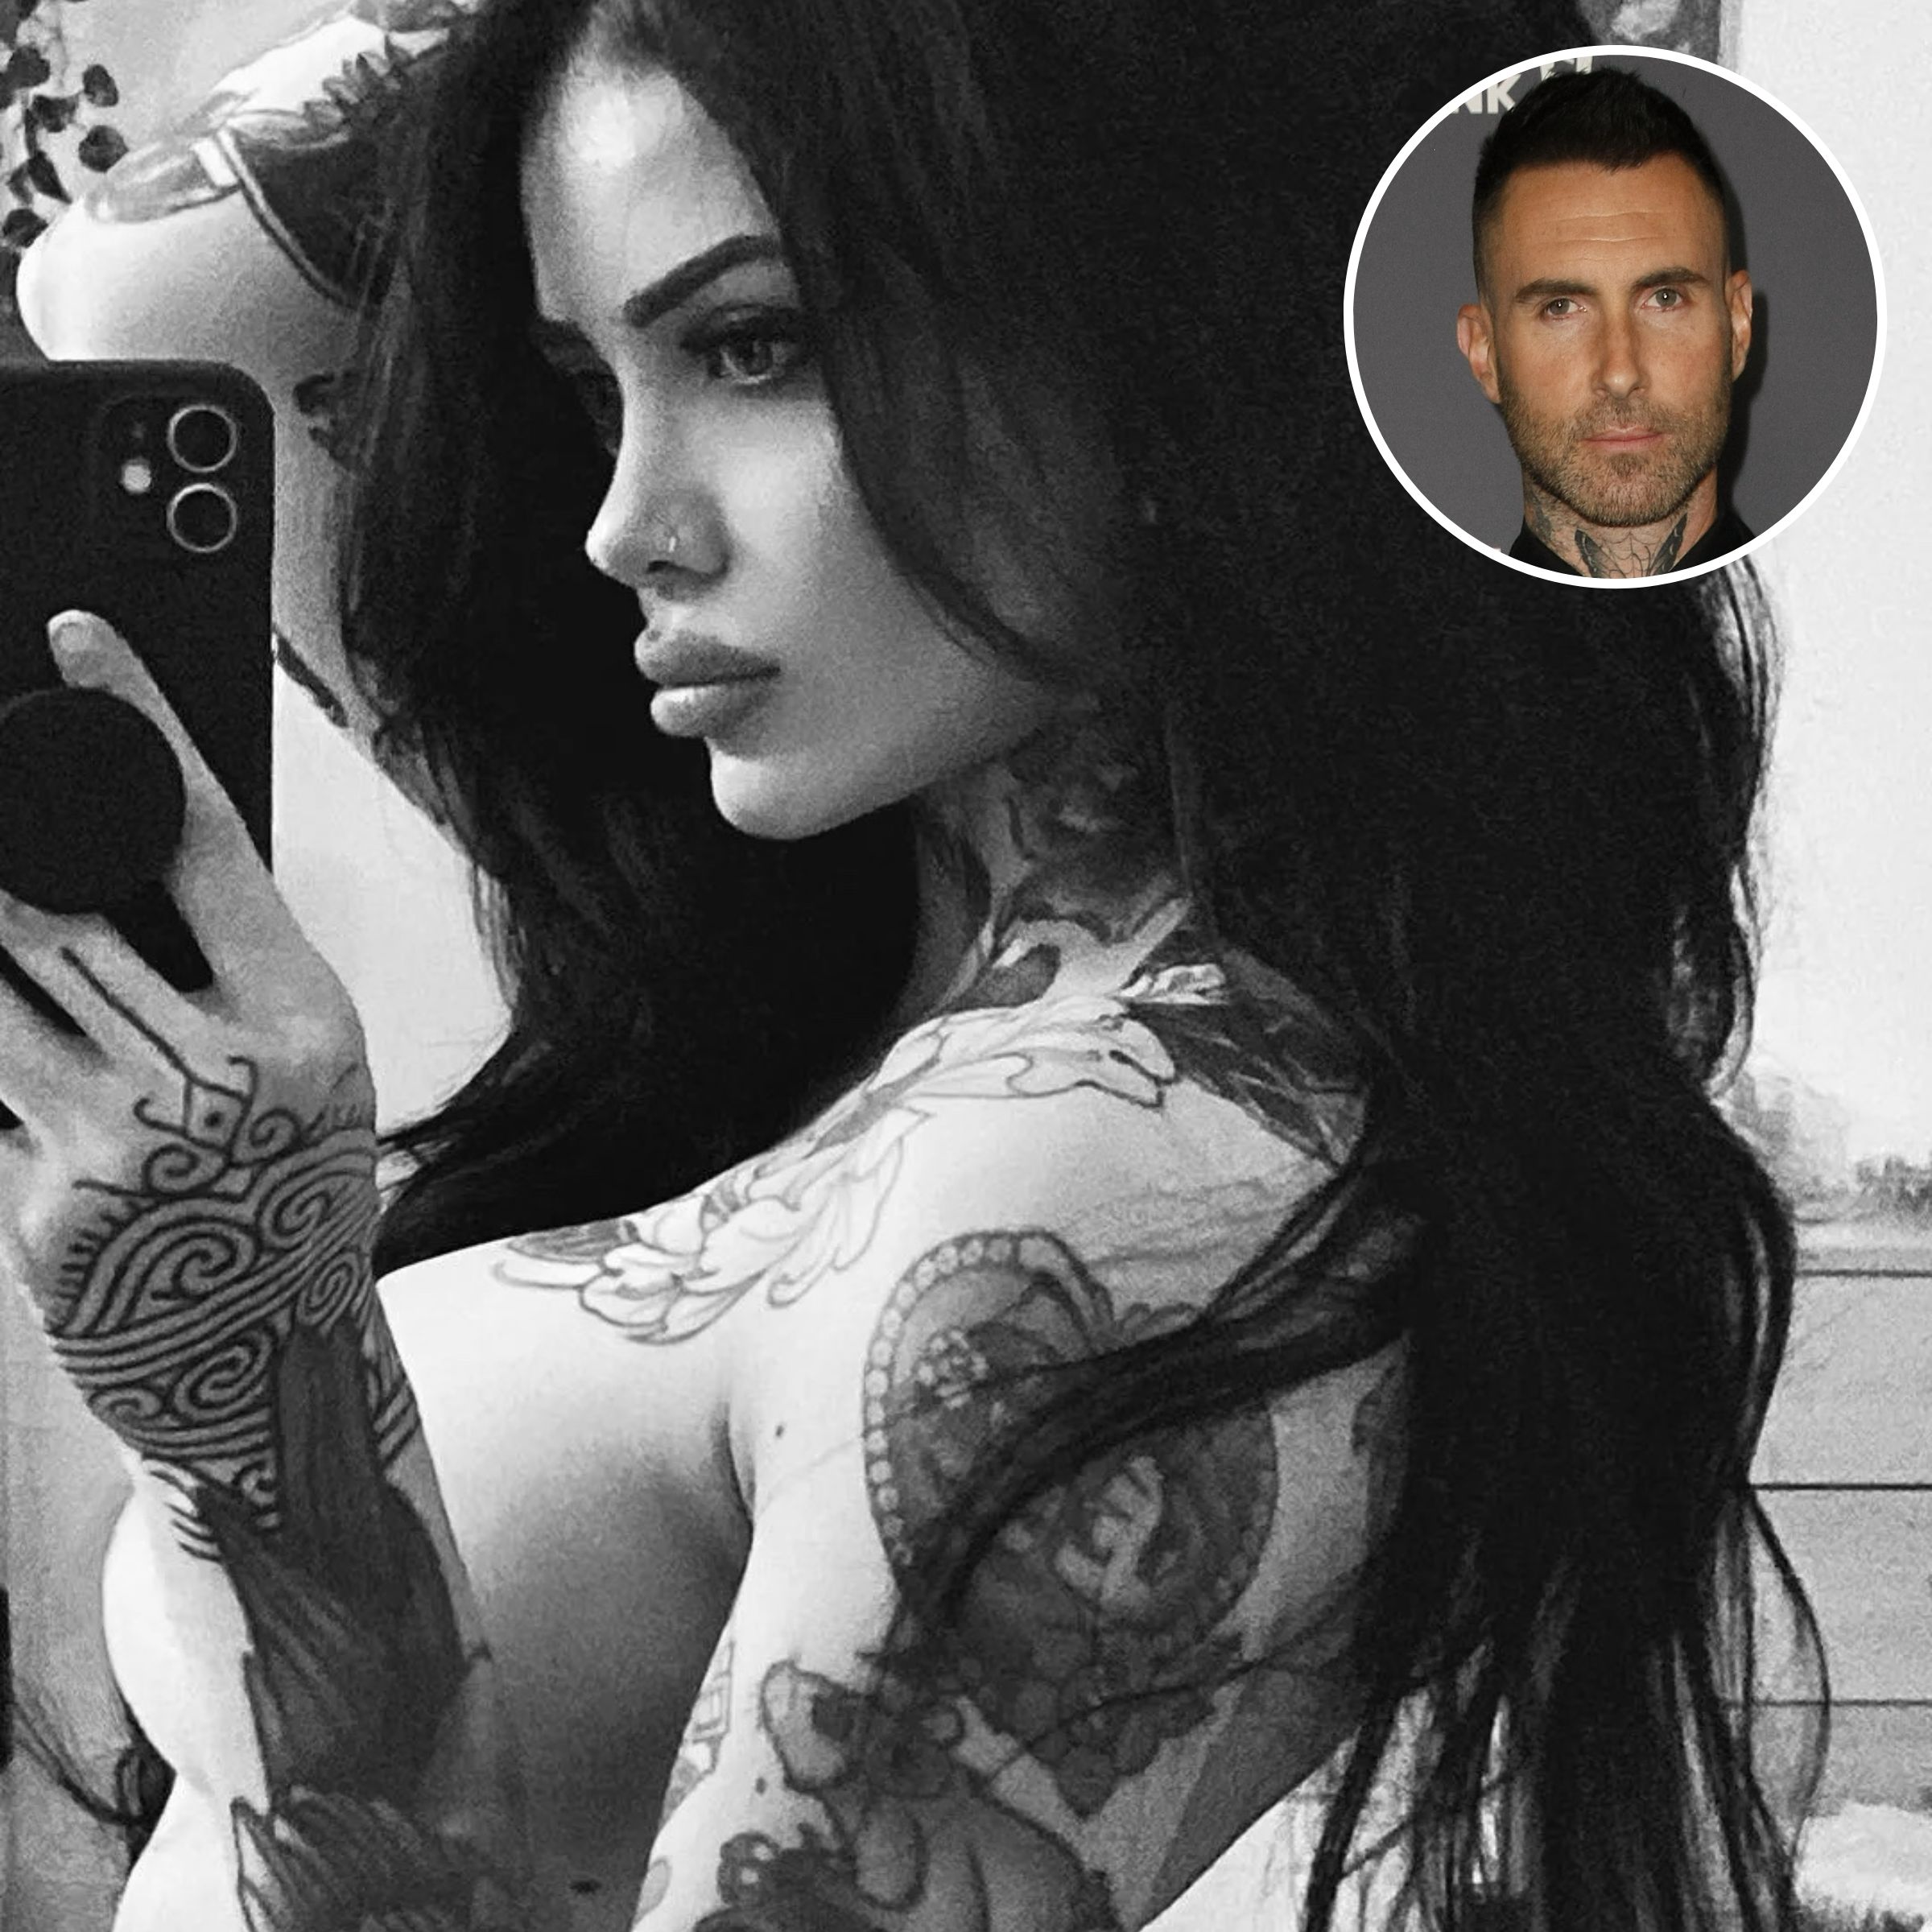 'Weird Kinks': Model Maryka Claims Adam Levine Sent Her a 'Naked Selfie' While Sexting